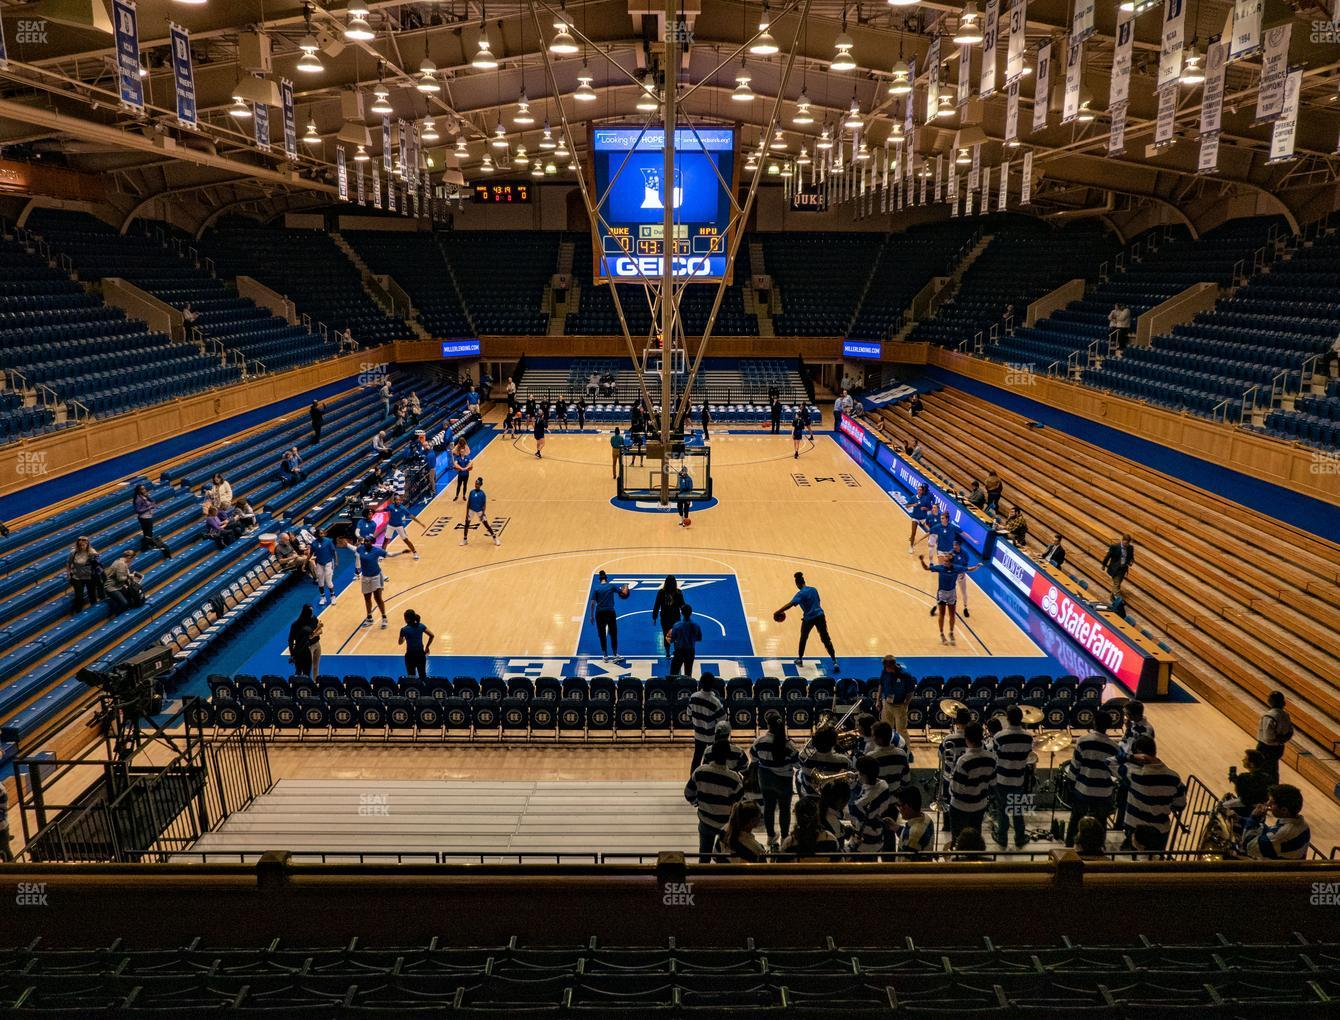 Cameron Indoor Stadium Seating Chart With Rows And Seat Numbers